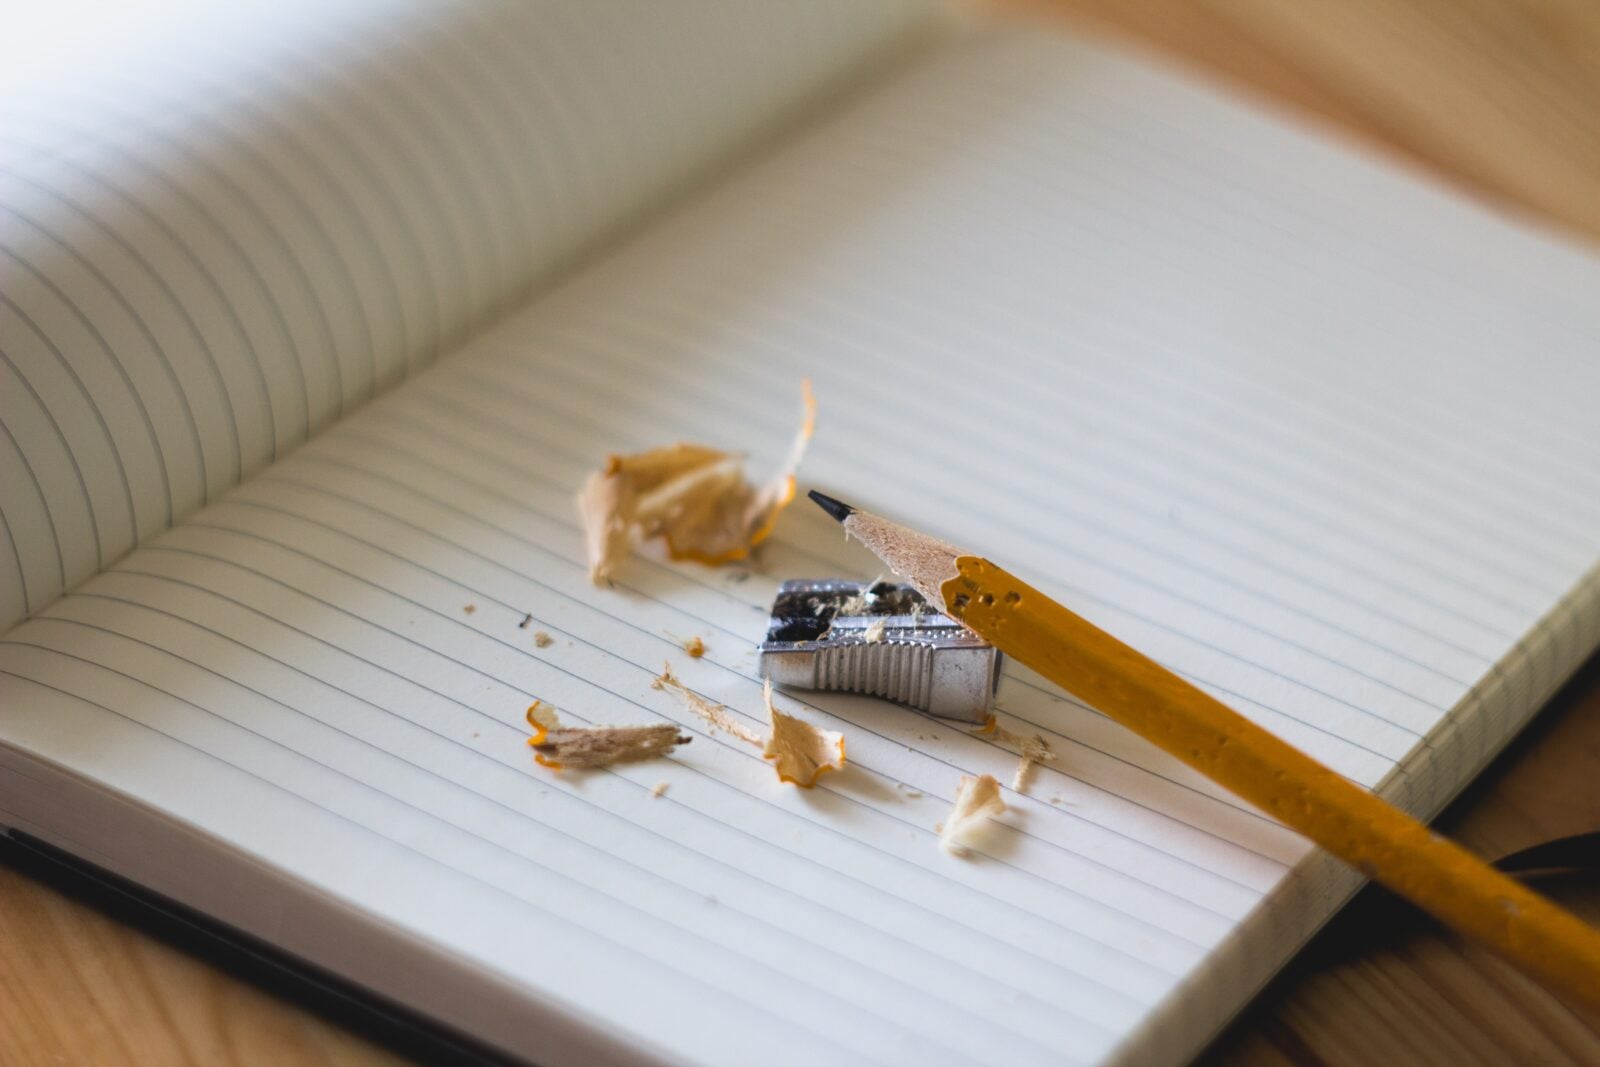 A pencil that is sharpened using a handheld pencil sharpener on a notebook. The residuals of the sharpened pencil lay messy on the notebook.